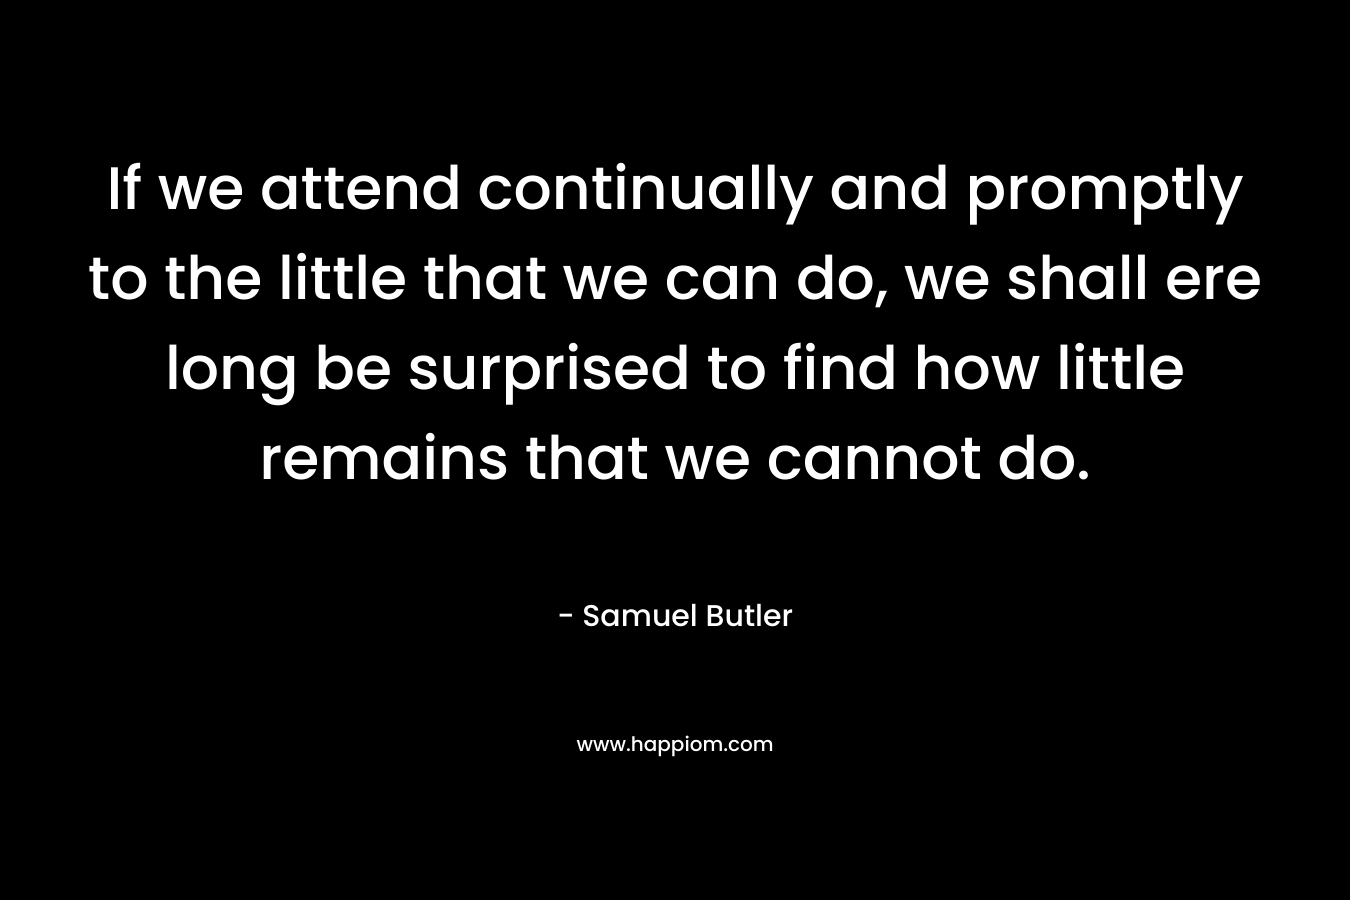 If we attend continually and promptly to the little that we can do, we shall ere long be surprised to find how little remains that we cannot do. – Samuel Butler